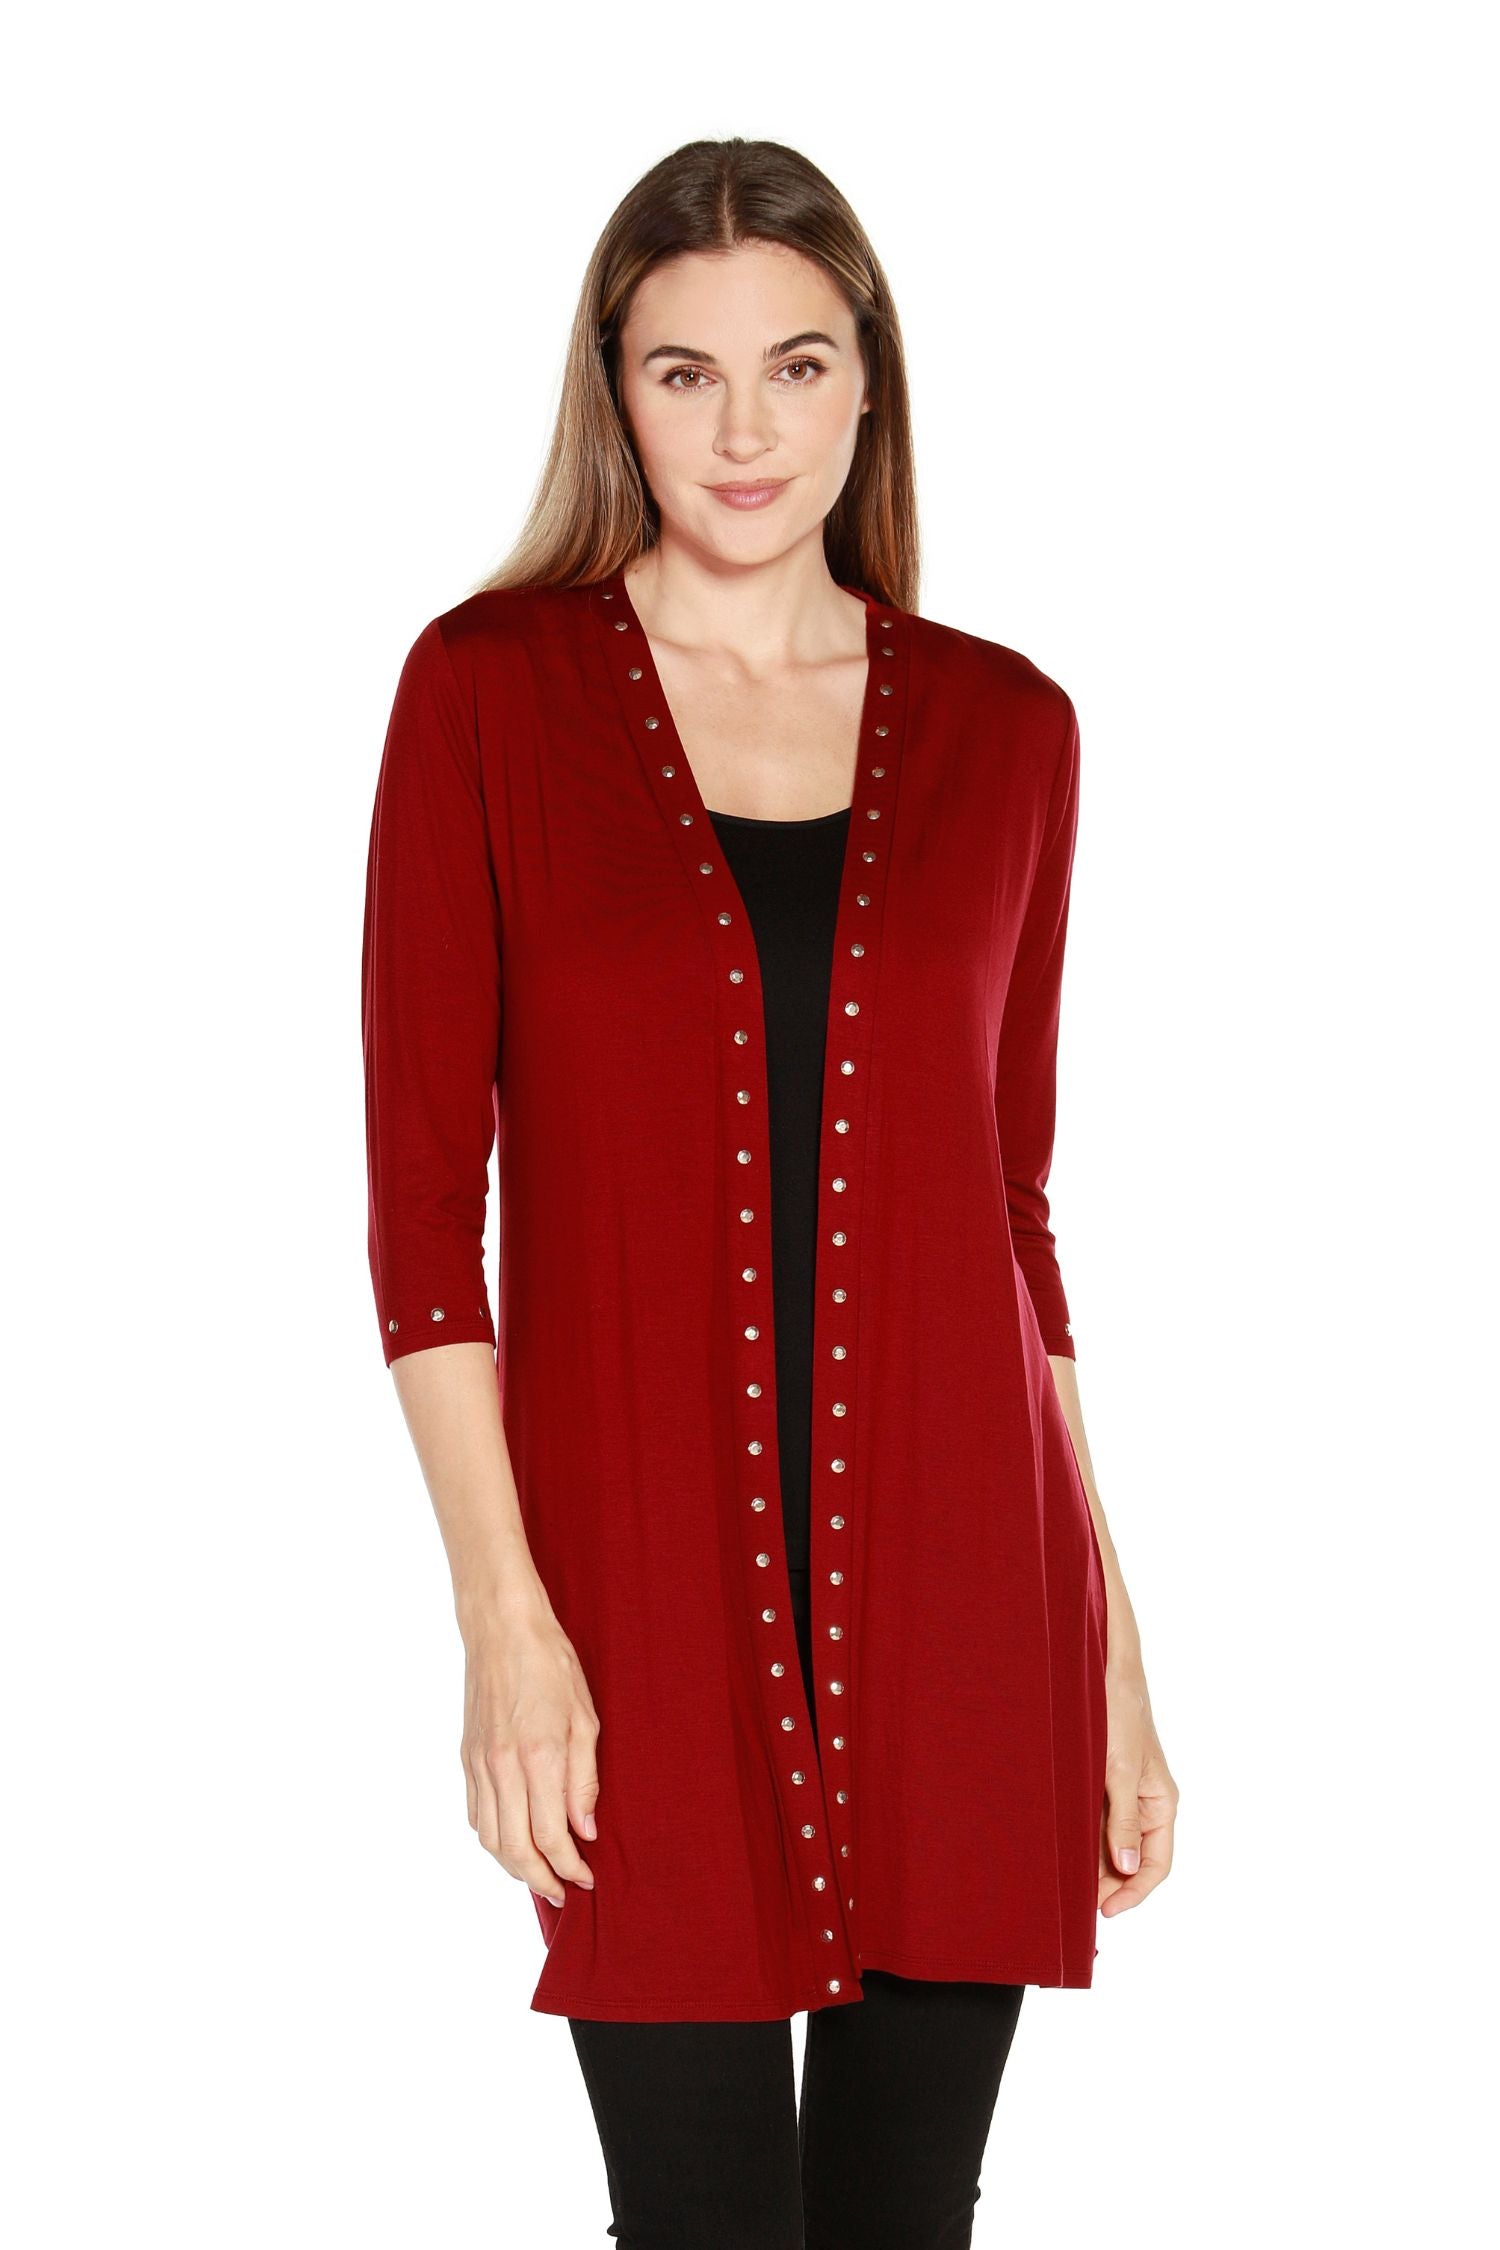 Women's Stylish Long Knit Cardigan Lightweight with 3/4 Sleeves and Rhinestud Trim